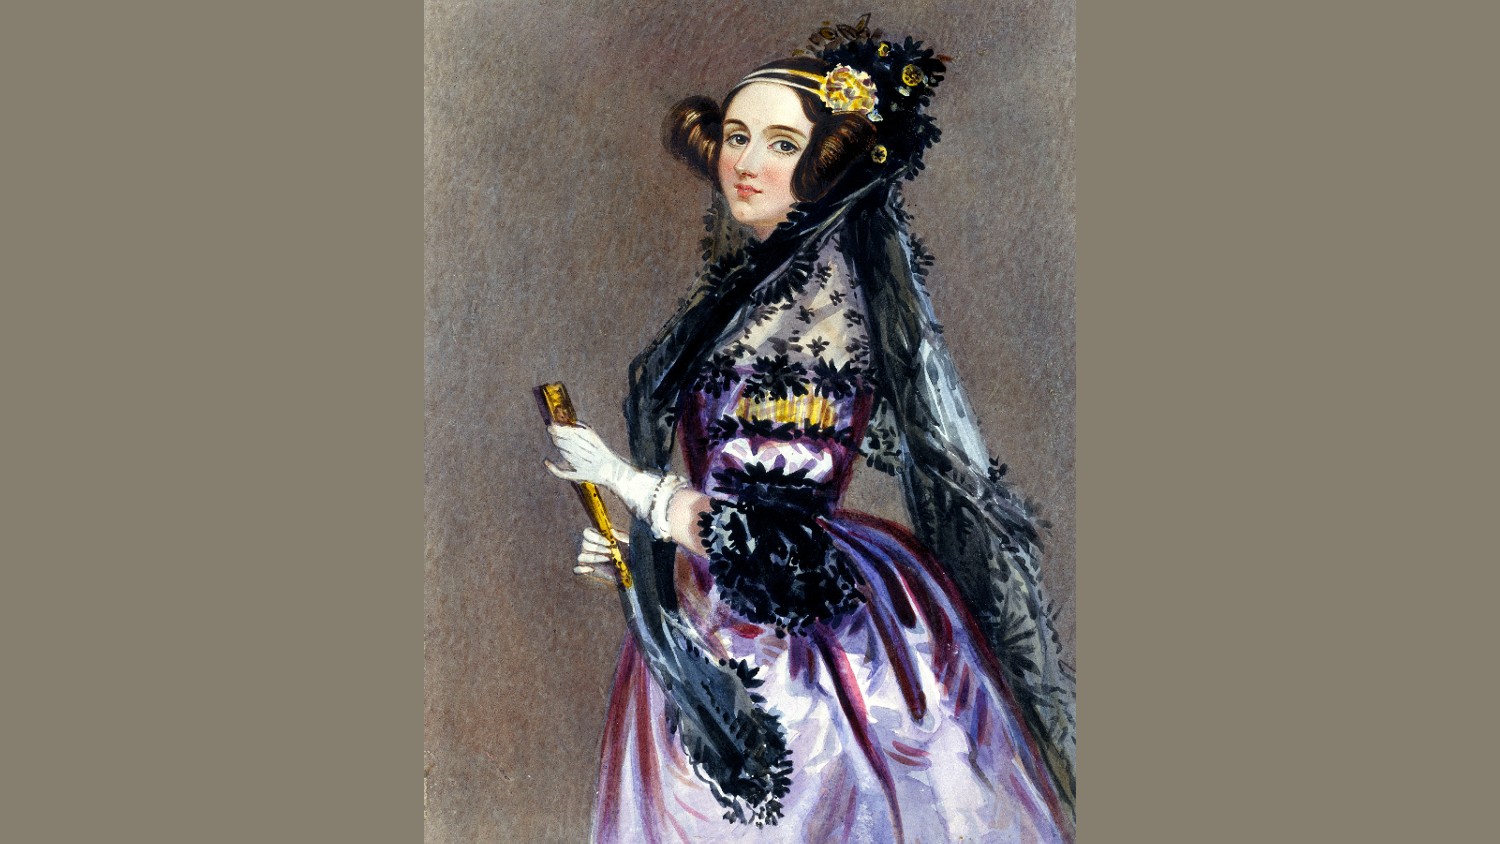 Watercolor portrait of Ada Lovelace wearing evening dress with a mantilla and holding a fan.